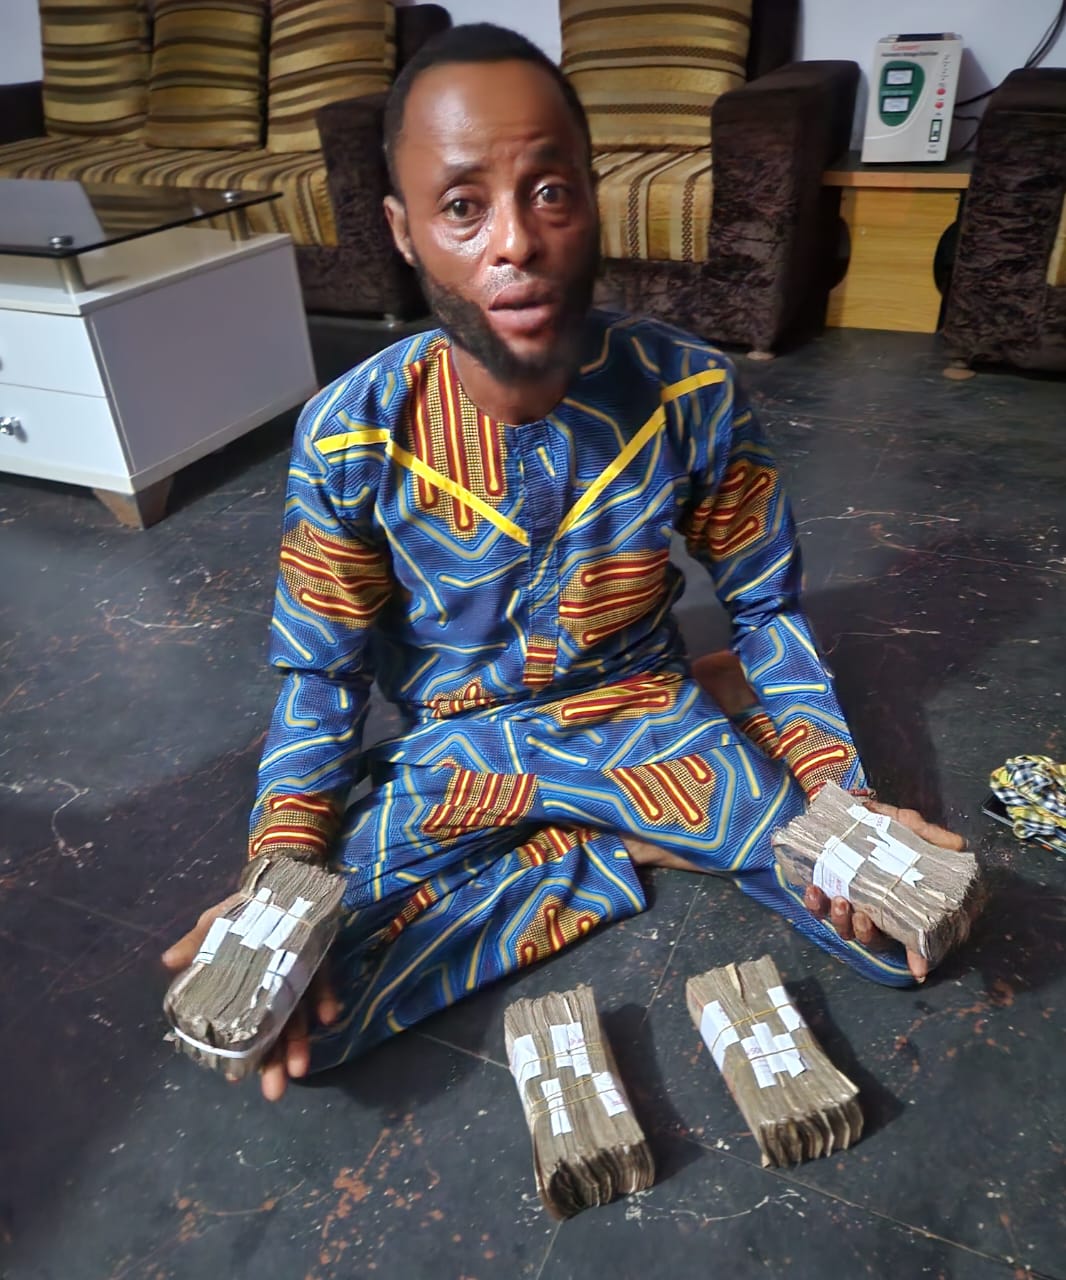 OGUN POLICE ARRESTS WANTED SERIAL KILLER/RITUALIST, REJECTS HIS ONE MILLION NAIRA BRIBE OFFER